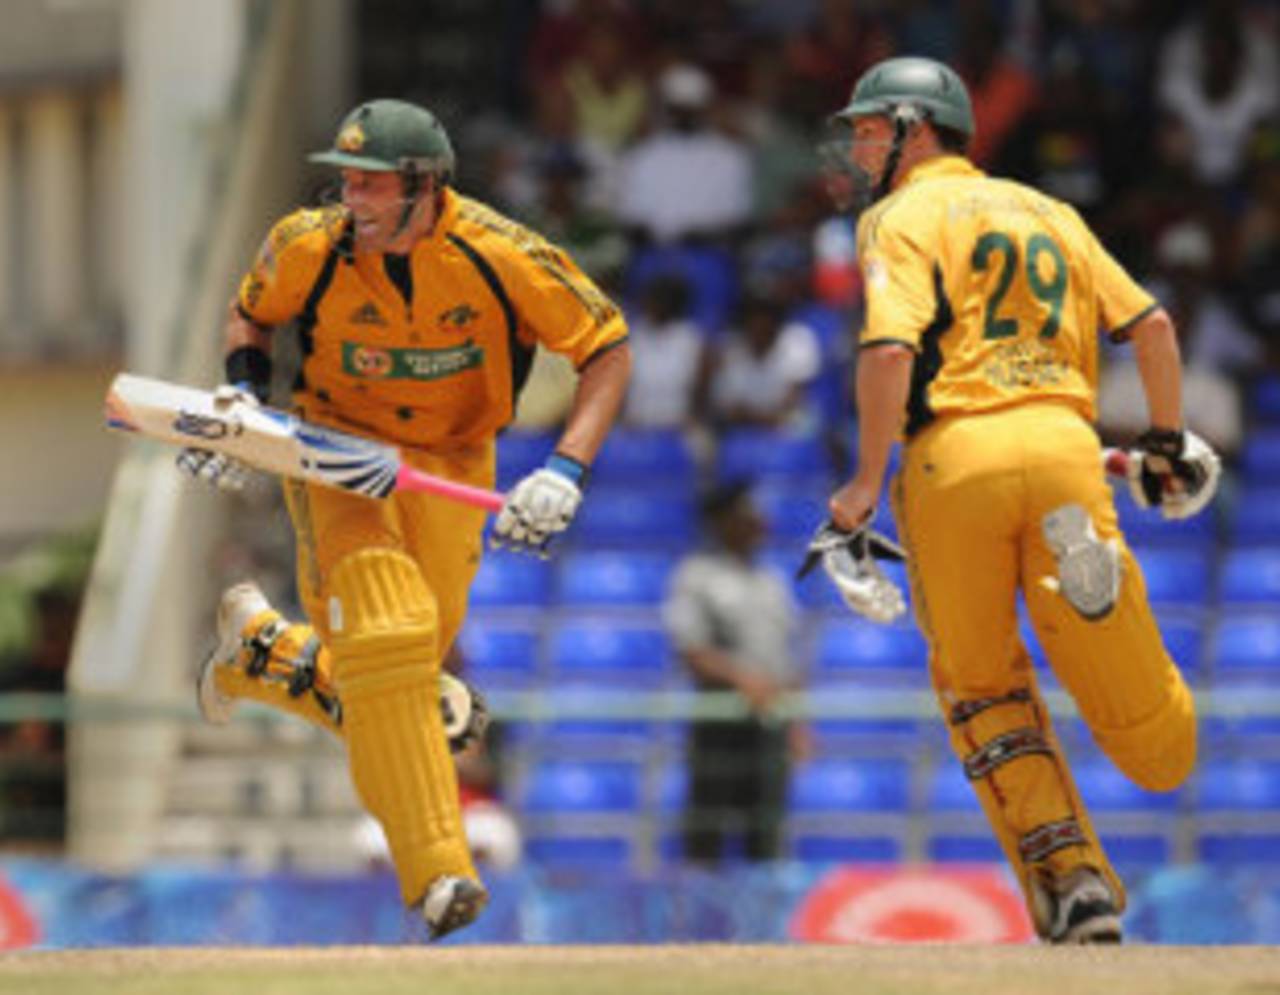 Michael Hussey and David Hussey bat together for the first time at international level, West Indies v Australia, 5th ODI, St Kitts, July 6, 2008